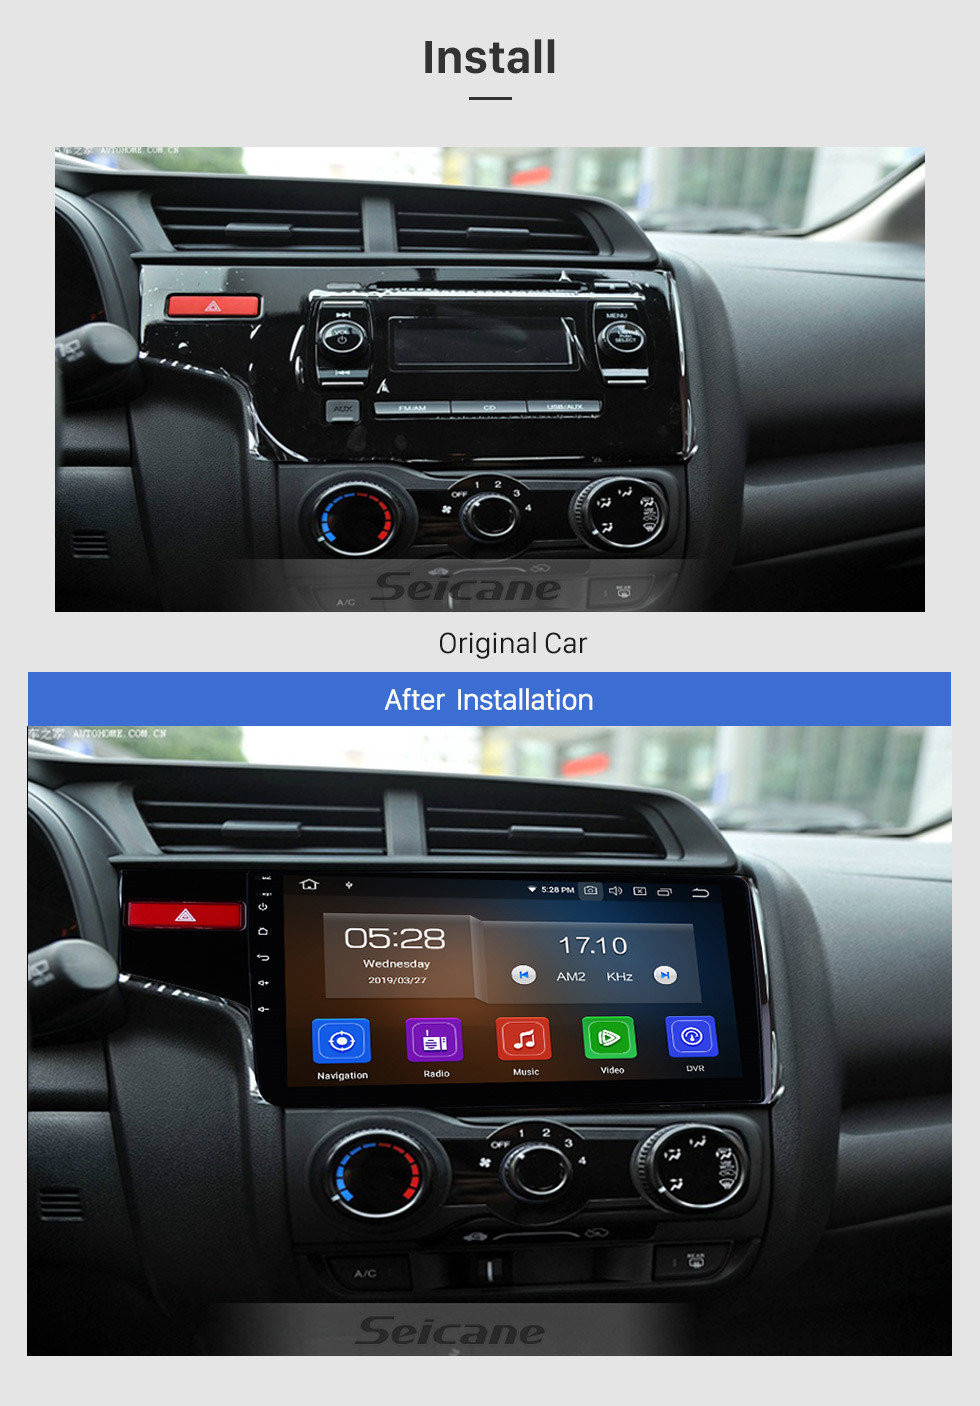 Seicane 10.1 Inch OEM Android 11.0 Radio Capacitive Touch Screen For 2014 2015 Honda FIT Support WiFi Bluetooth GPS Navigation system TPMS DVR OBD II AUX Headrest Monitor Control Video Rear camera USB SD